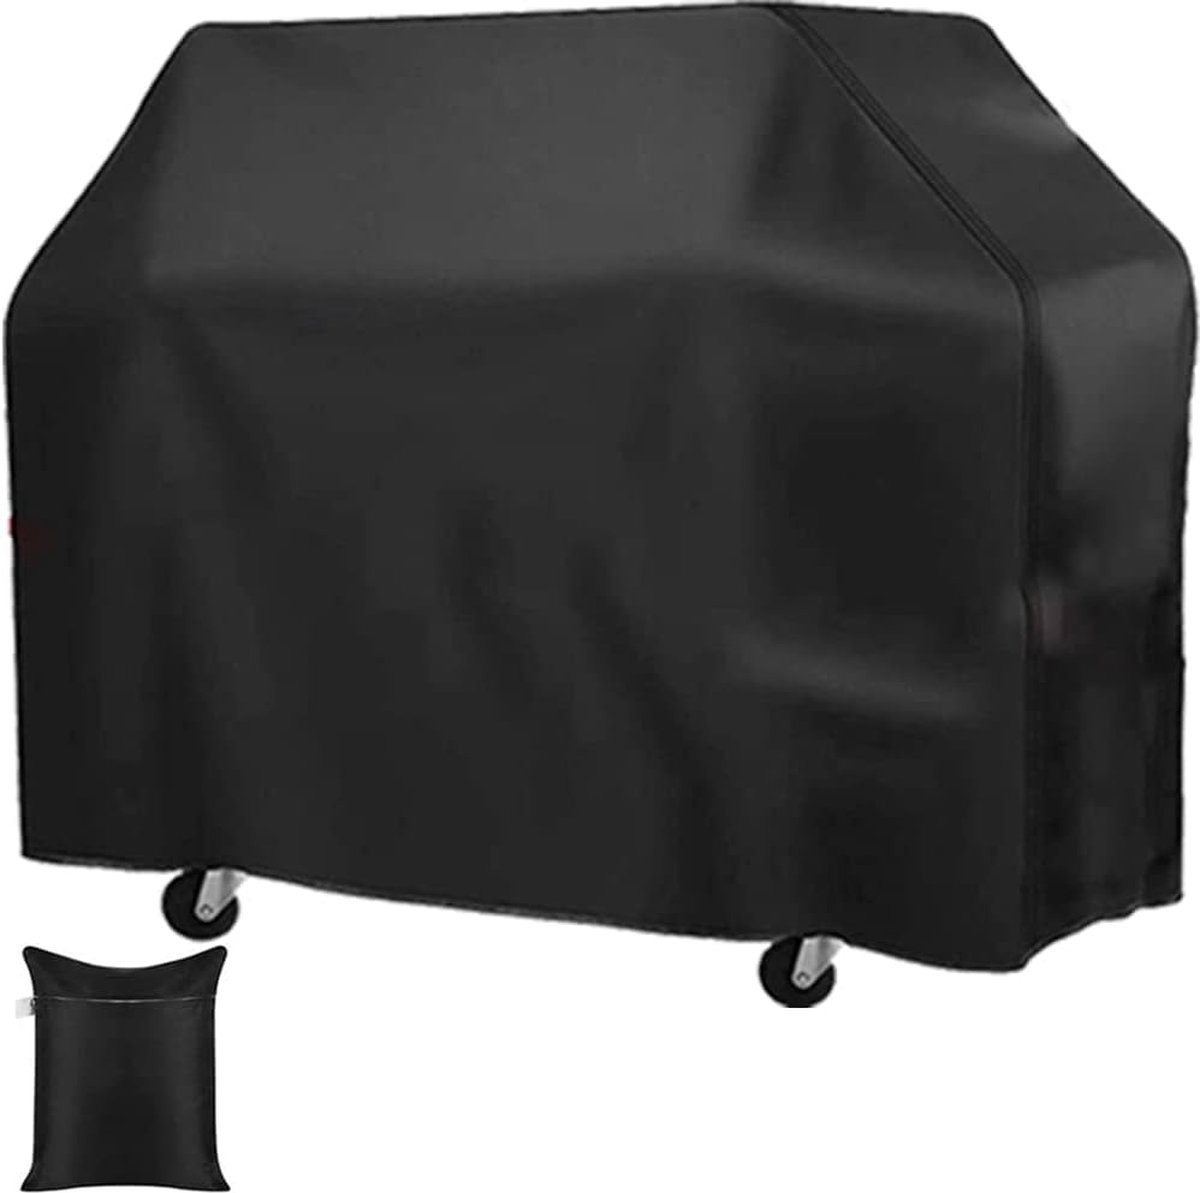 Gas Grill Barbecue Cover Skyour Waterdichte BBQ Gas Grill Roker Cover Weerbestendig UV Heavy Duty Patio Outdoor Gas Barbecue BBQ Grill Covers (M: 39x24x59